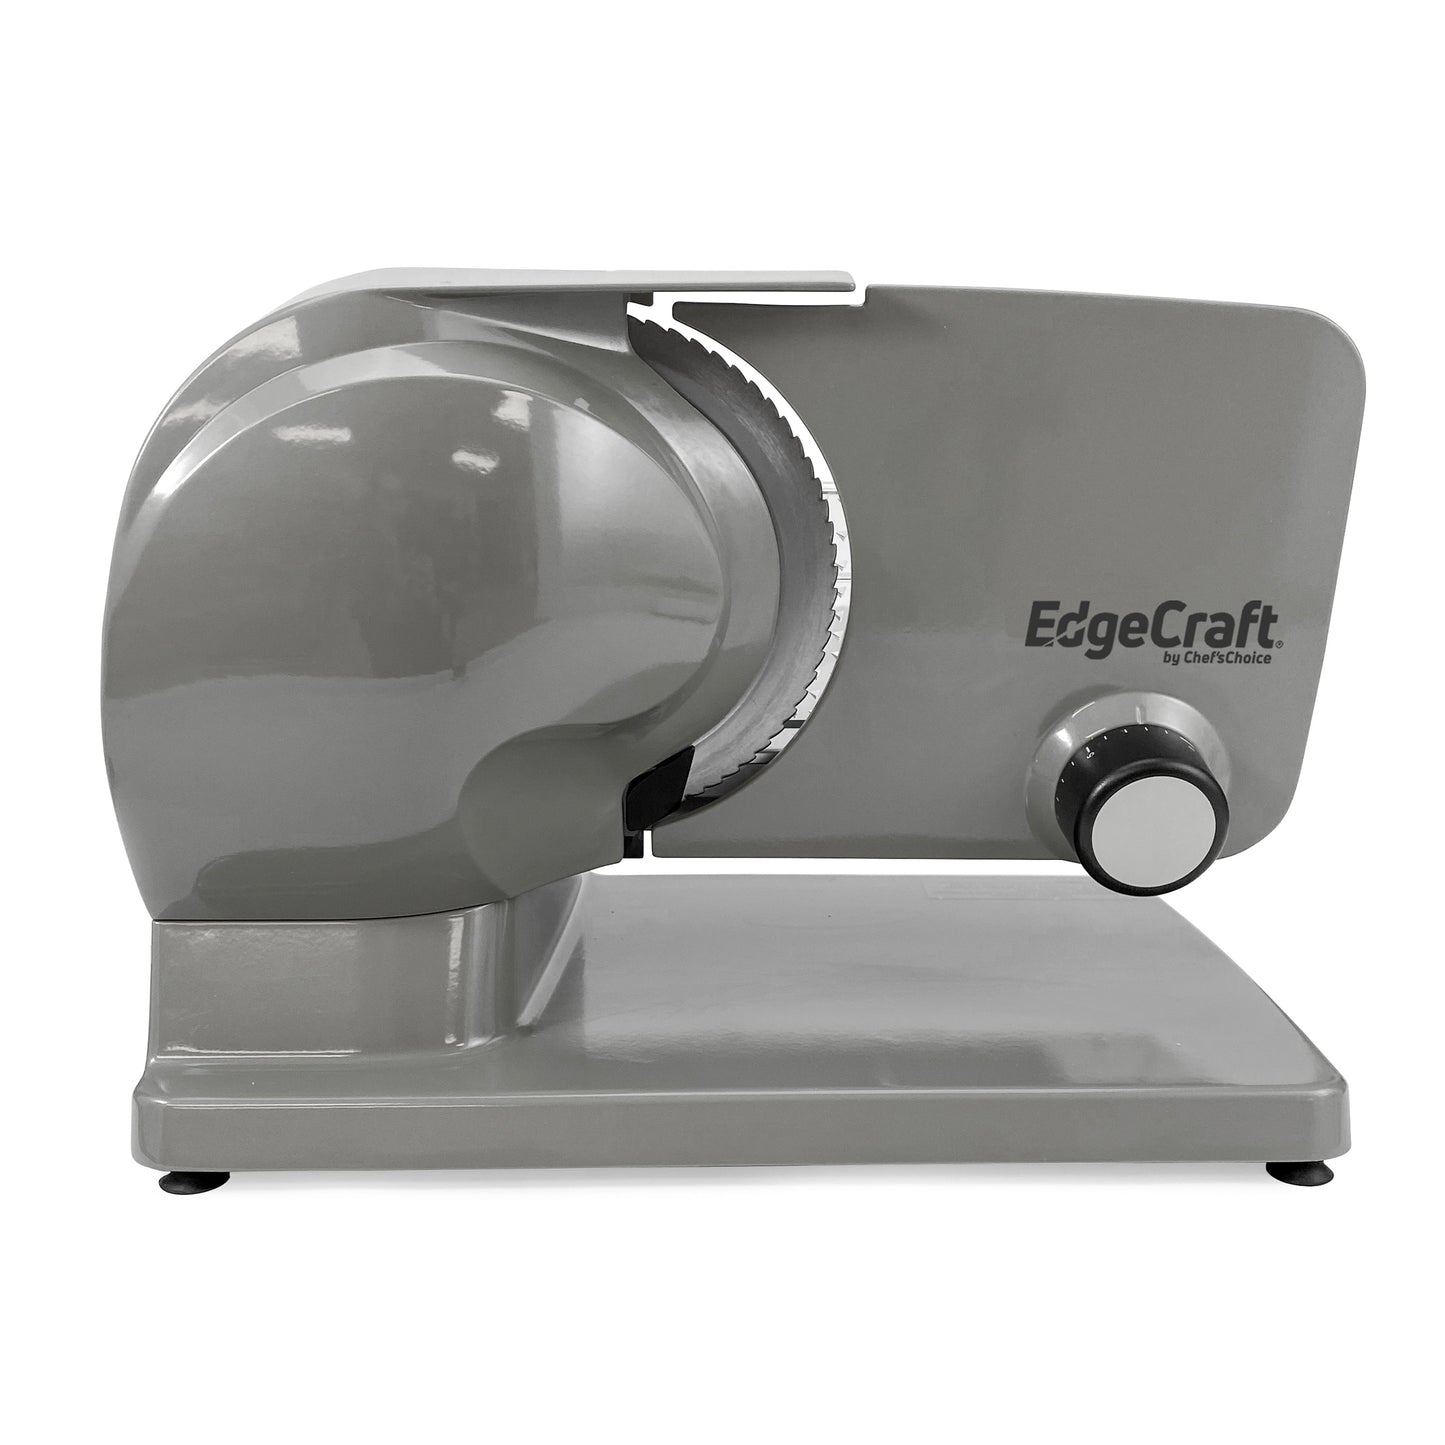 EdgeCraft Model E615 Electric Meat Slicer, 7-Inch Stainless Blade, in Silver